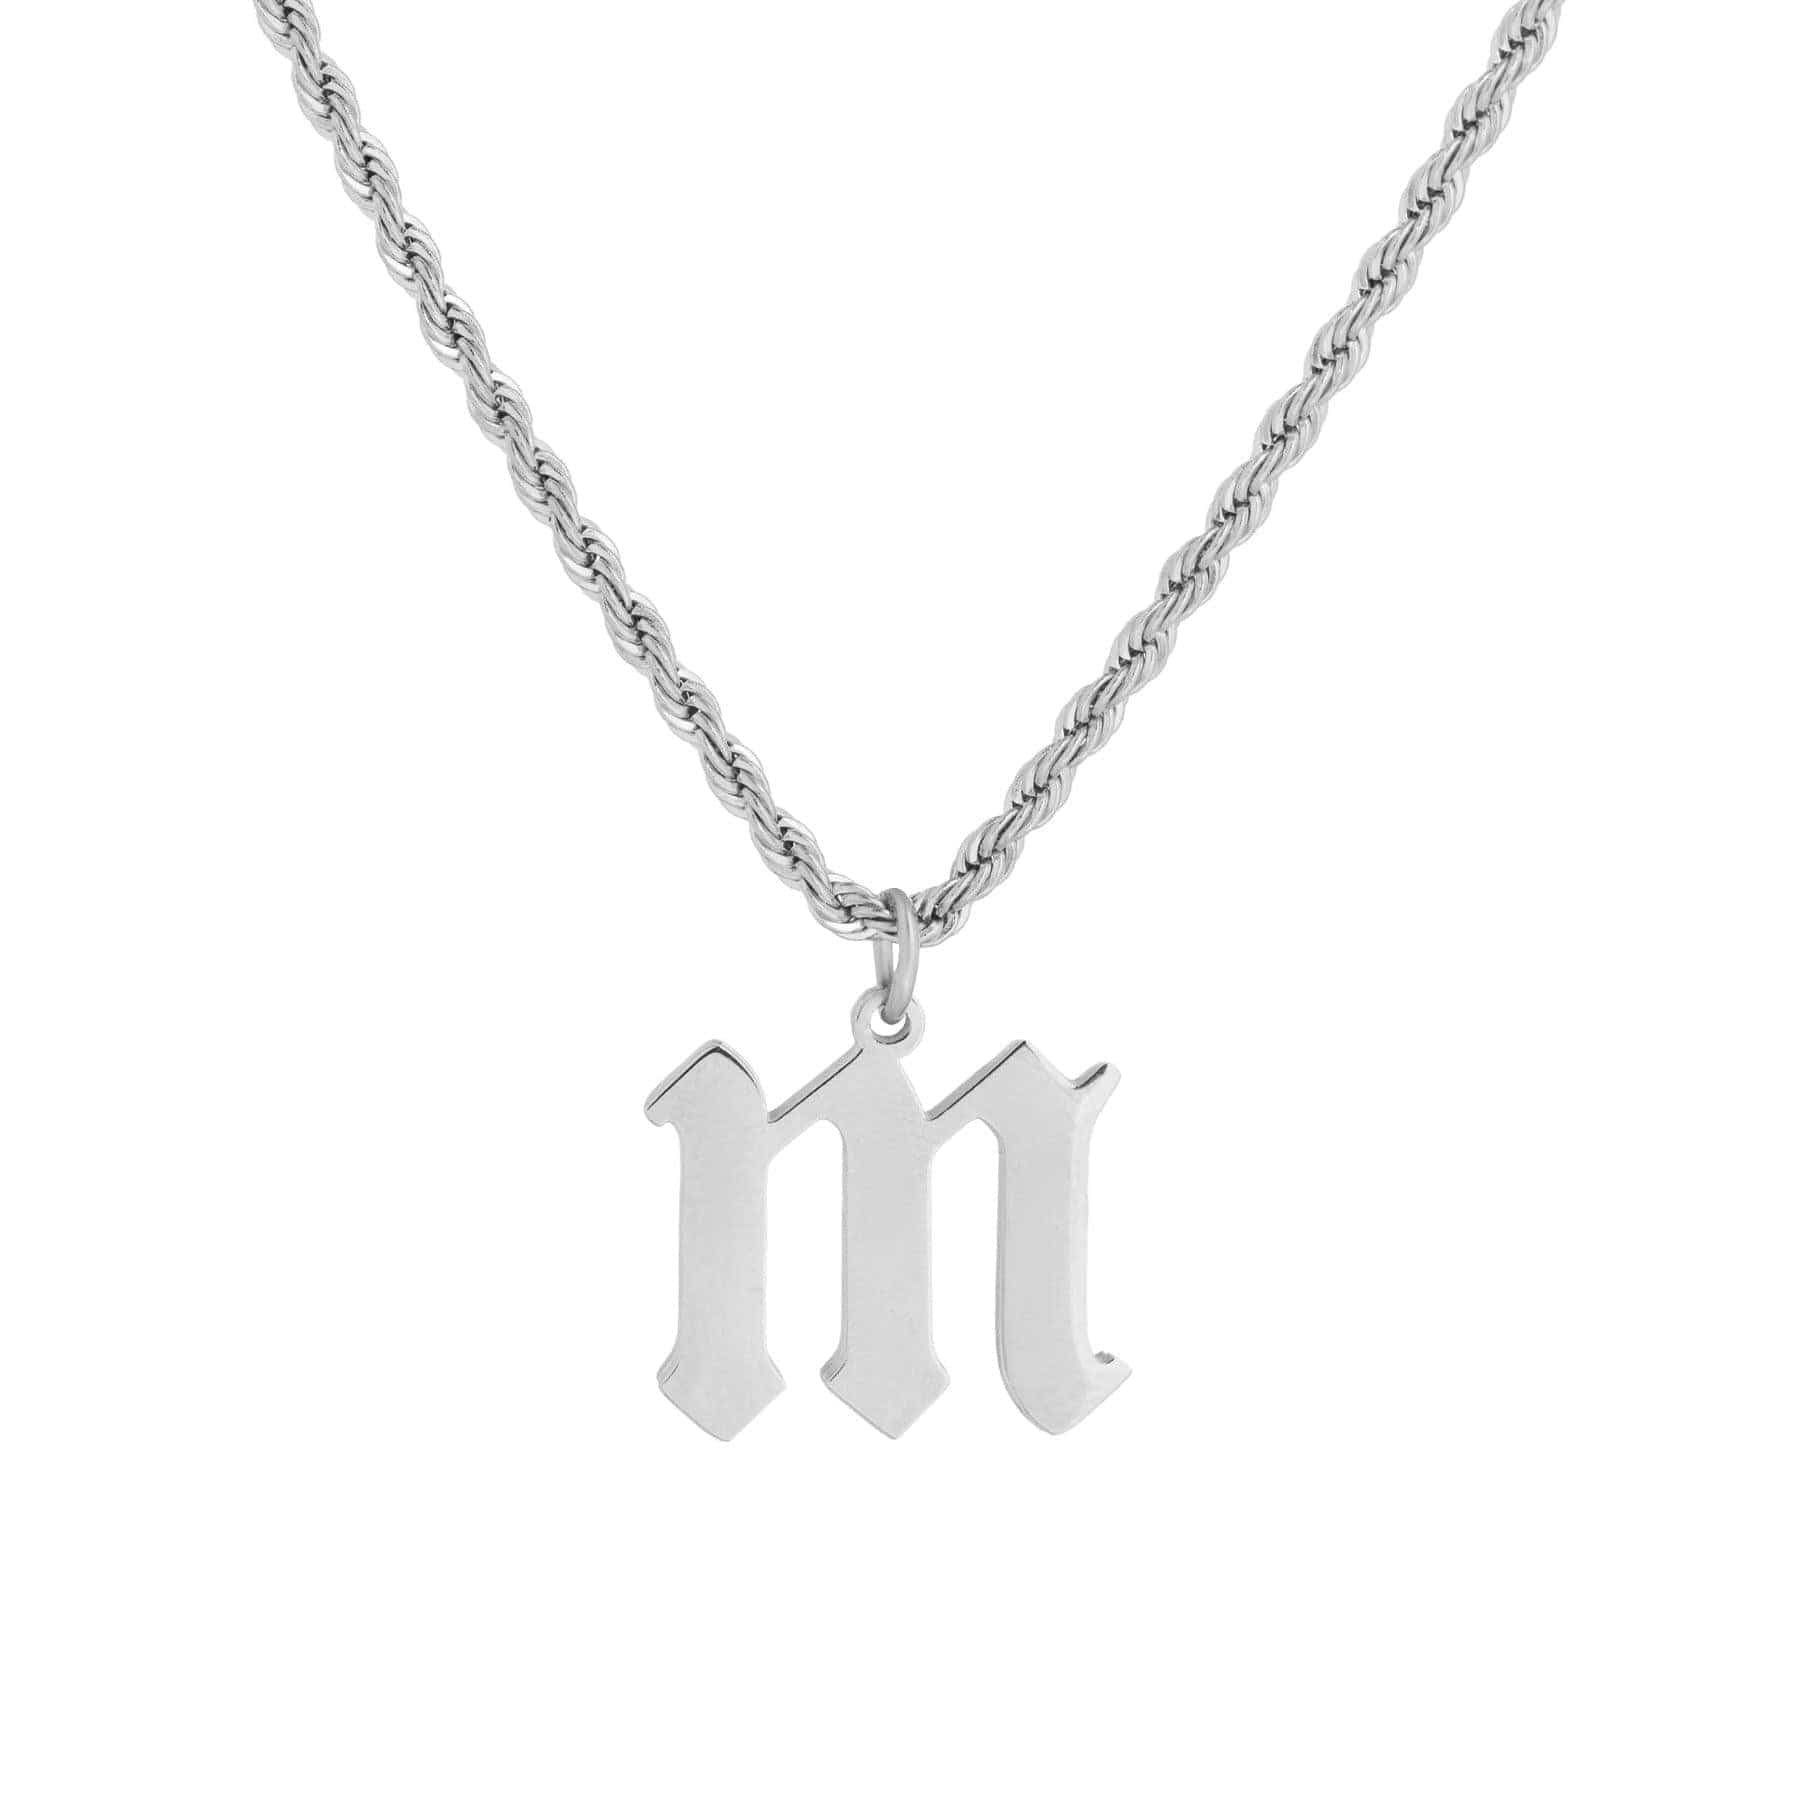 Bohomoon Stainless Steel Marella Initial Necklace